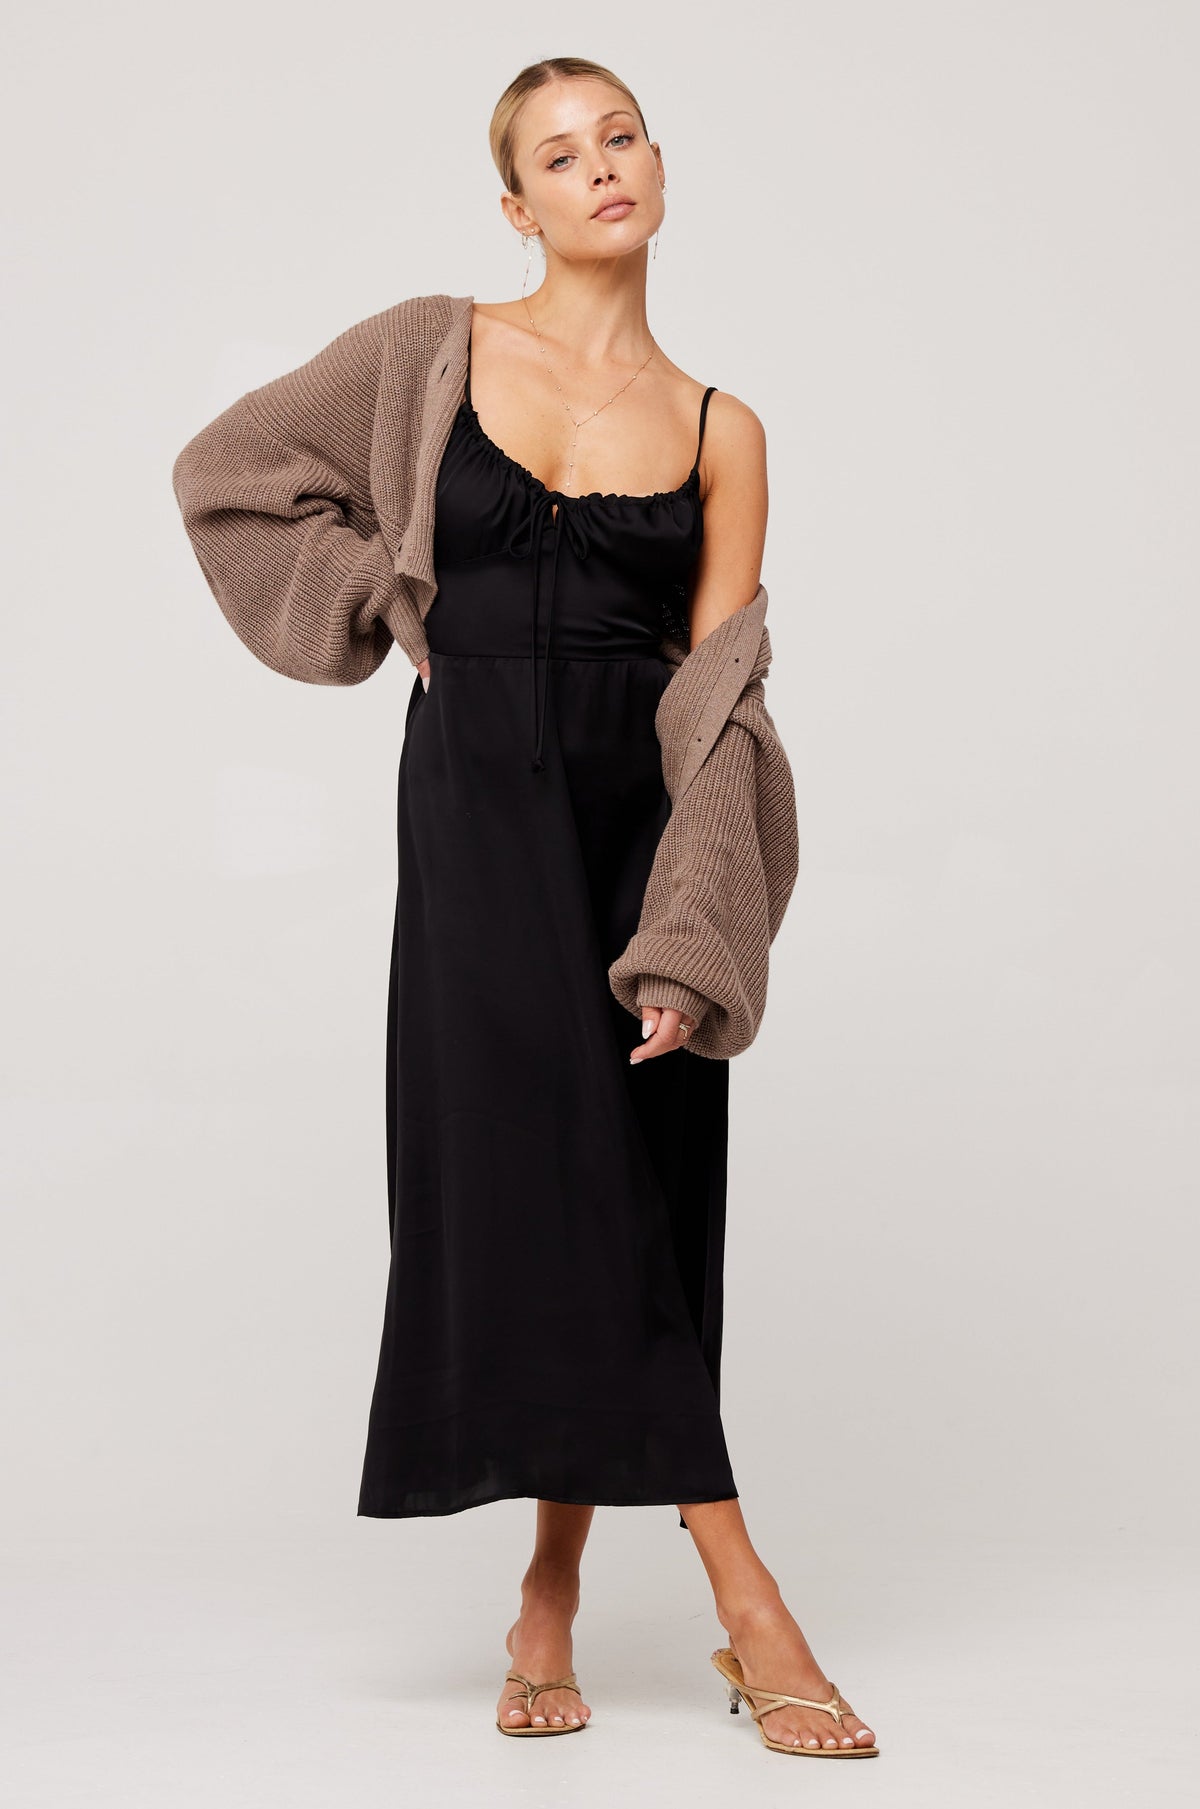 This is an image of Annette Cardigan in Chai - RESA featuring a model wearing the dress